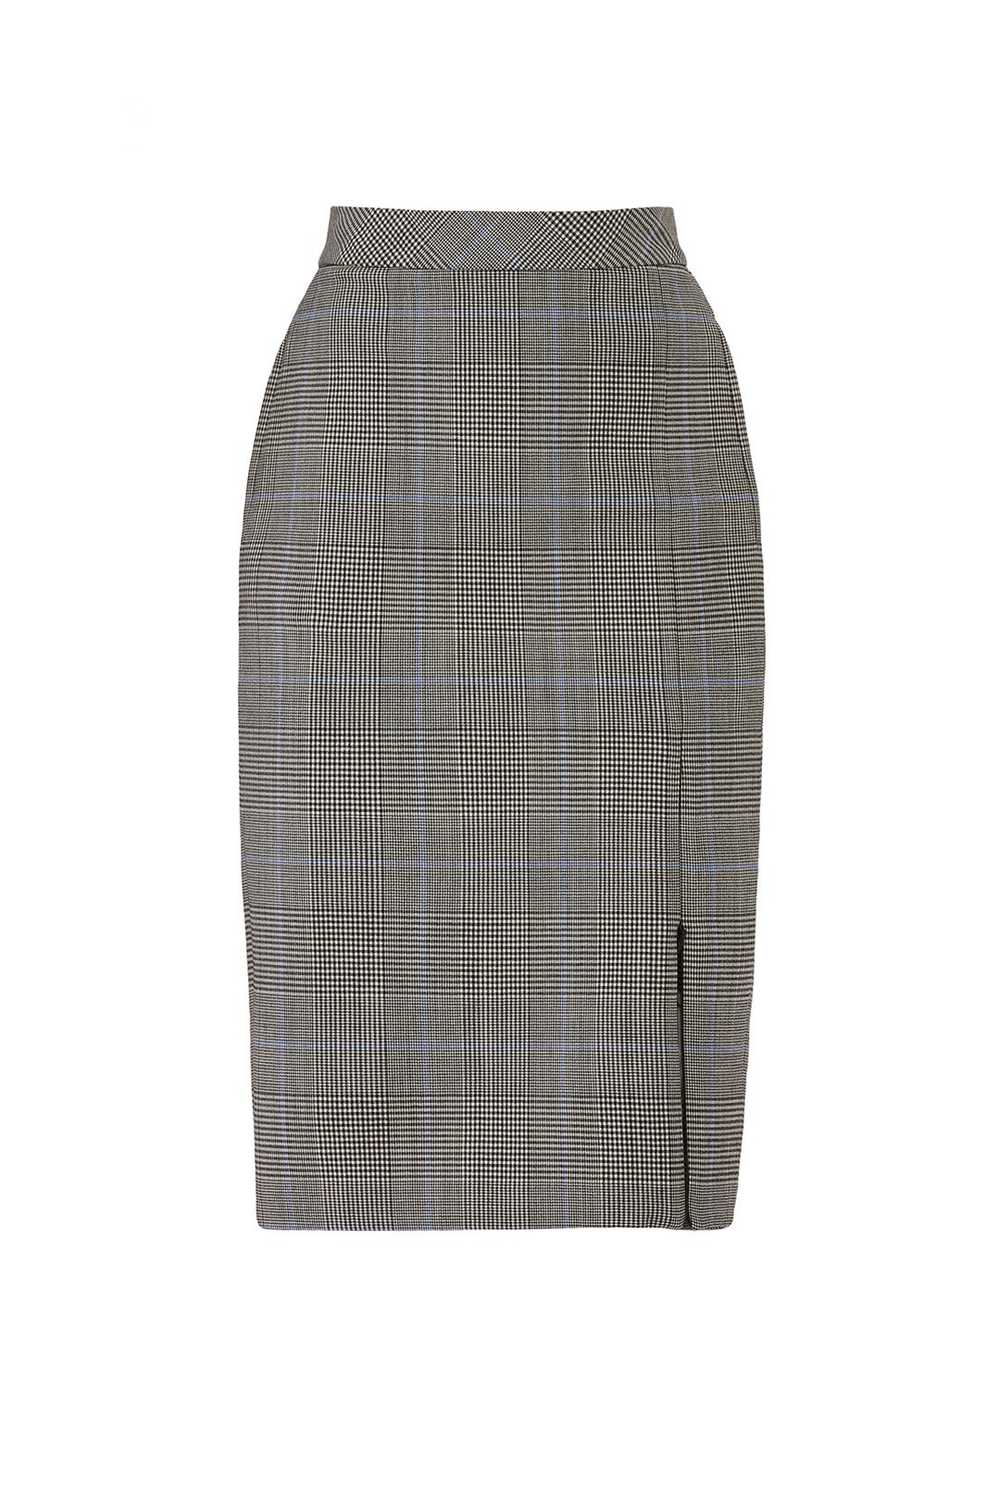 Theory Zip Front Pencil Skirt - image 4